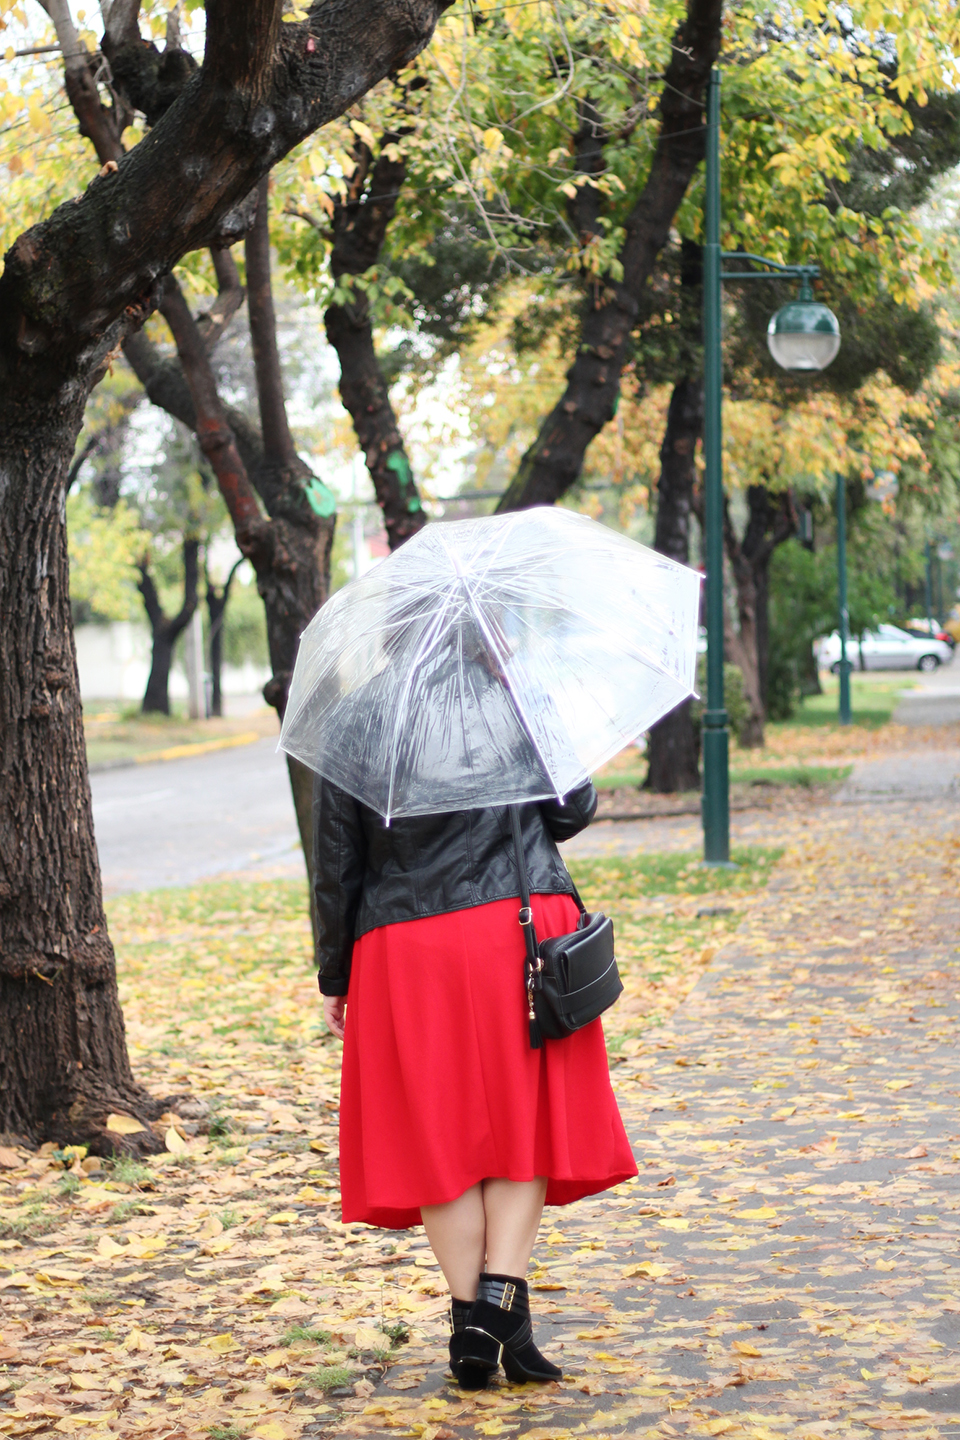 Red midi skirt for fall outfit - Rainy day with pop of color - Outfit ideas for curvy girls